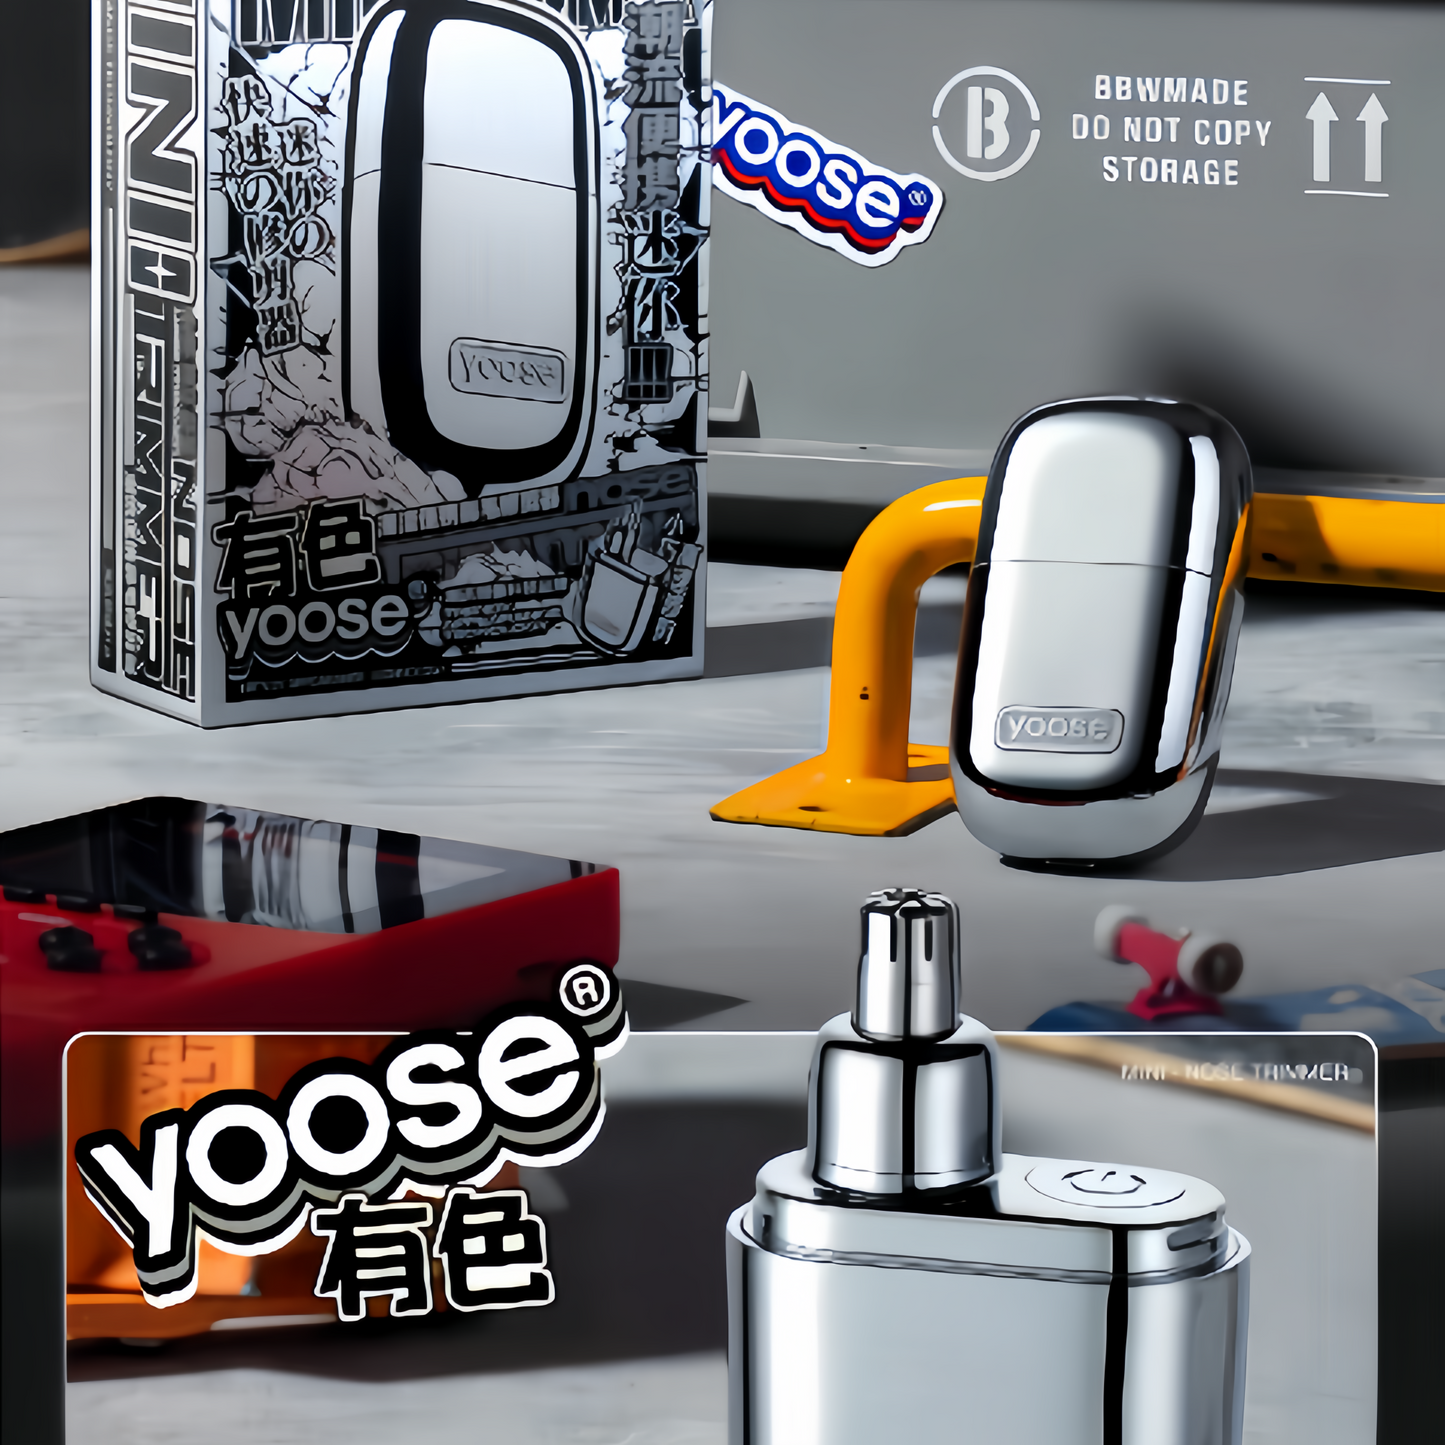 YOOSE Nose Hair Trimmer, IPX7 Waterproof, Type-C Rechargeable Nose Trimmer with Dust Protection Cap, Dual Edge Blade